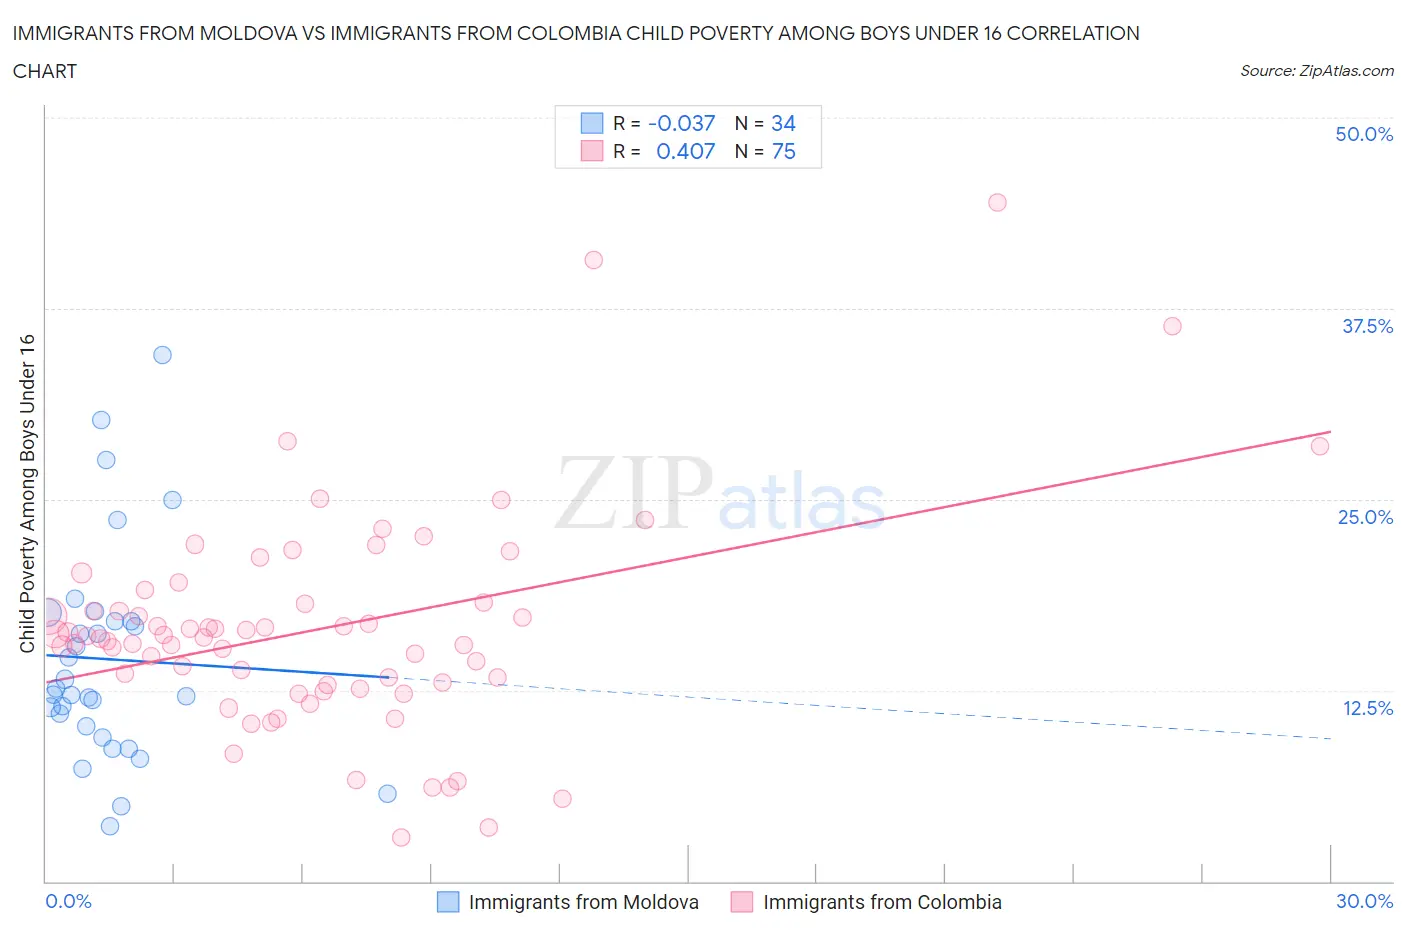 Immigrants from Moldova vs Immigrants from Colombia Child Poverty Among Boys Under 16